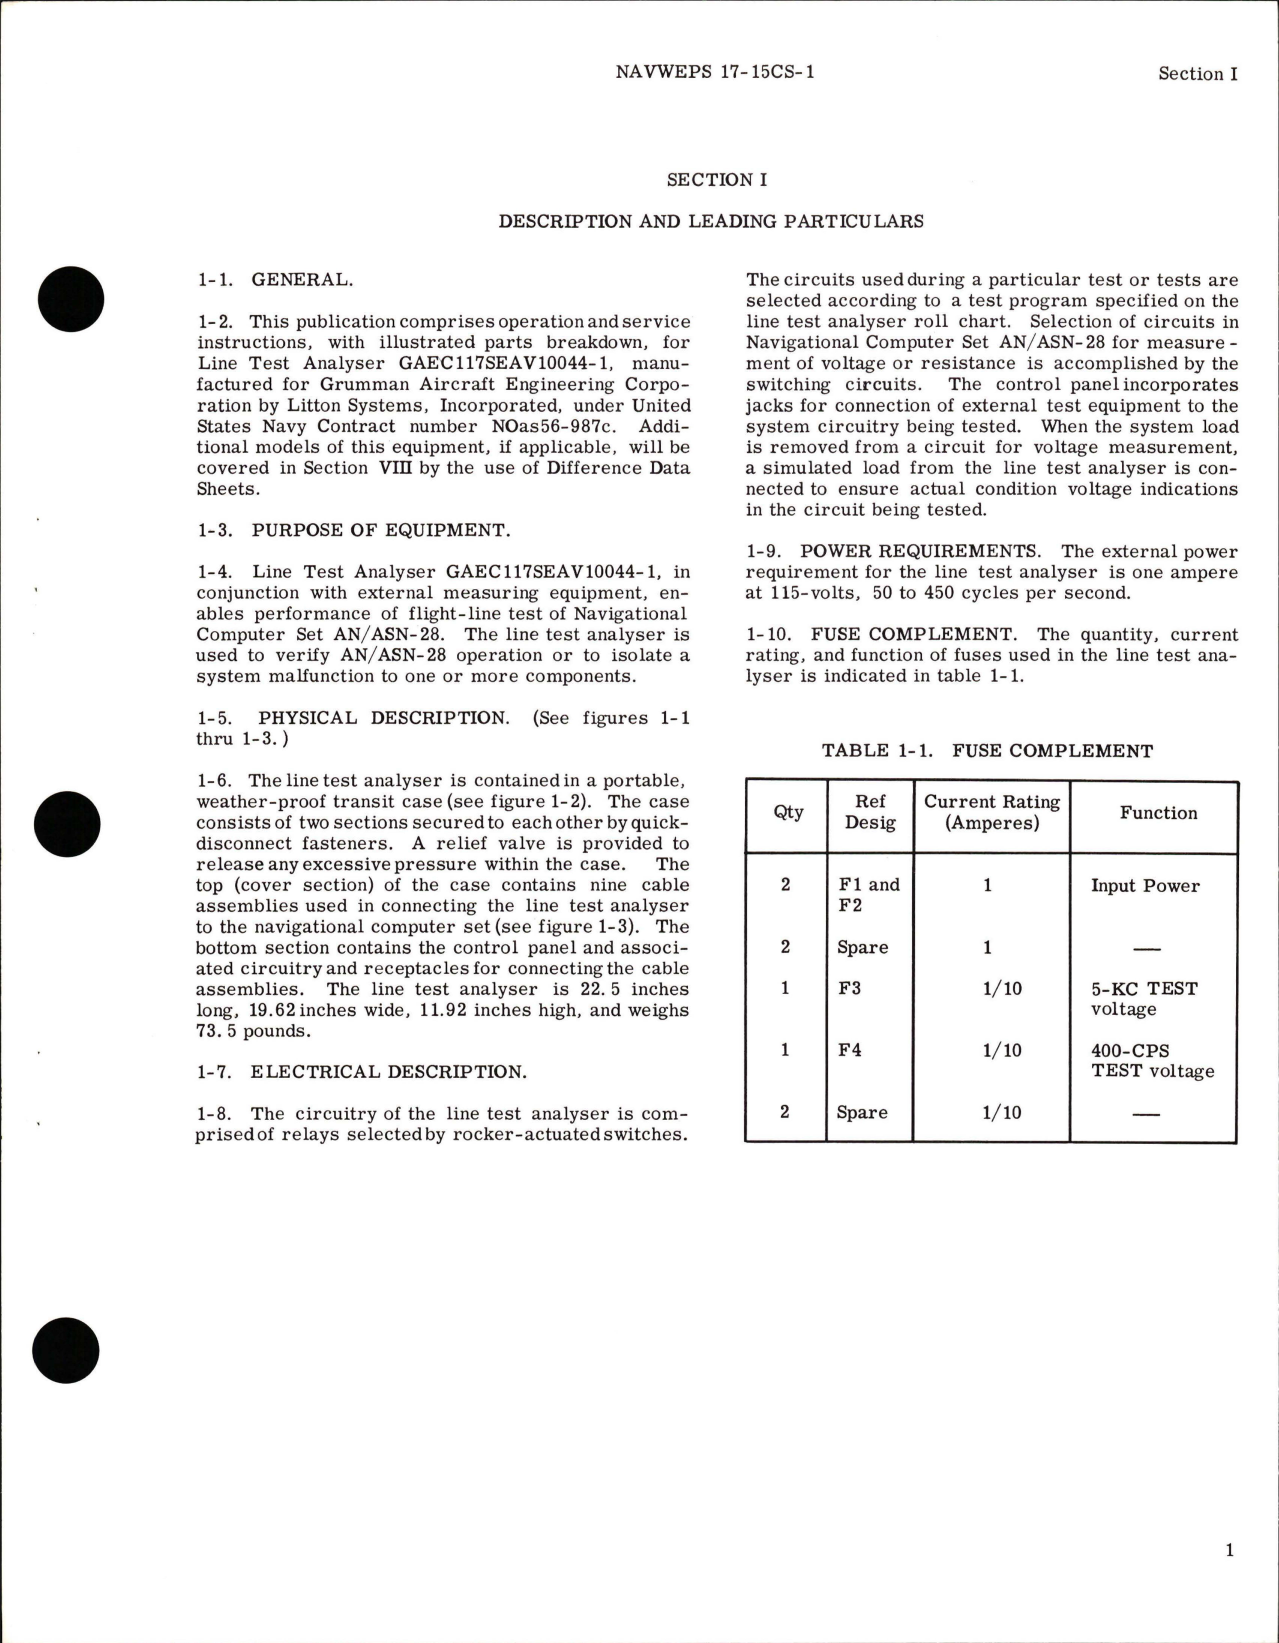 Sample page 9 from AirCorps Library document: Operation, Service and Illustrated Parts Breakdown for Line Test Analyser - GAEC117SEAV 10044-1 - Part 220554